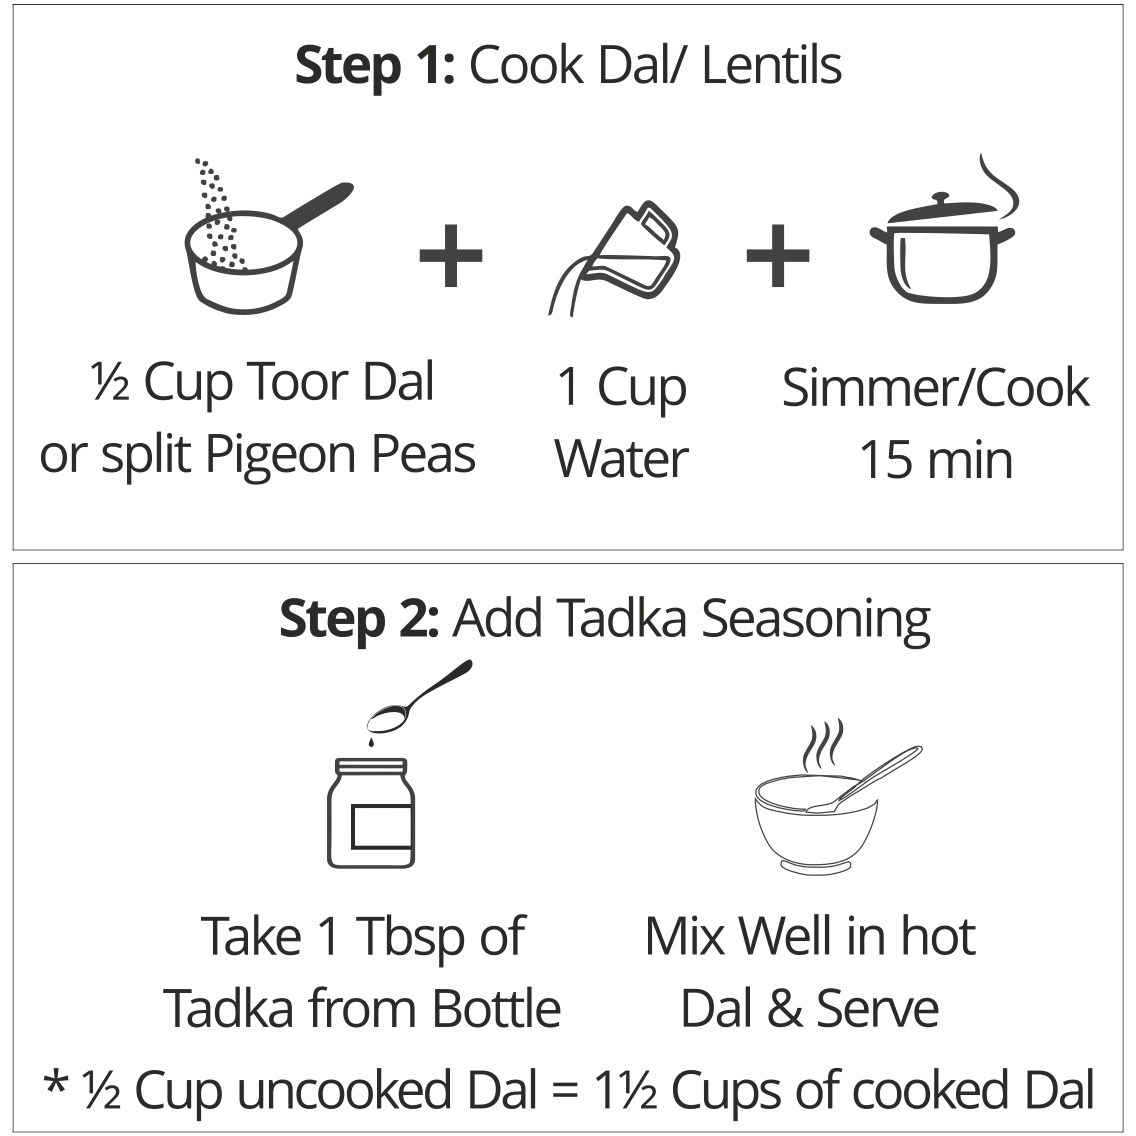 EL The Cook Ready-to-Use Ghee Tadka(CONCENRATED Whole Spice Tempering) for Dal, Indian Lentils Seasoning, Super Saver Jar Pack, 6.34oz, Vegetarian, Gluten-Free (Flavor: Dal Tadka)